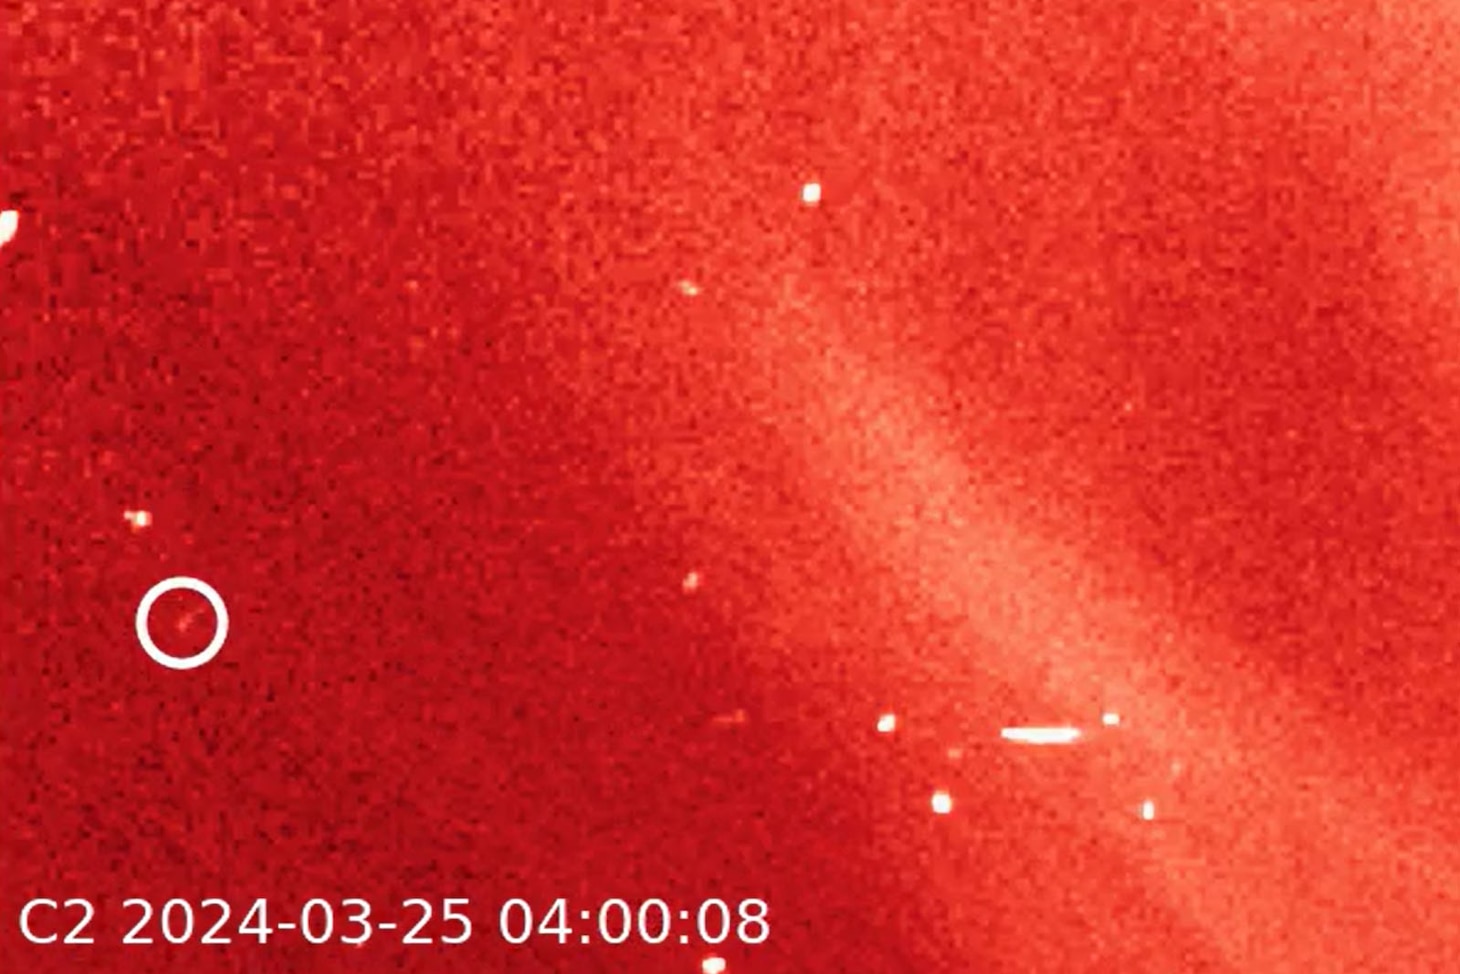 NRL’s Sungrazer Project Discovers 5000th Comet